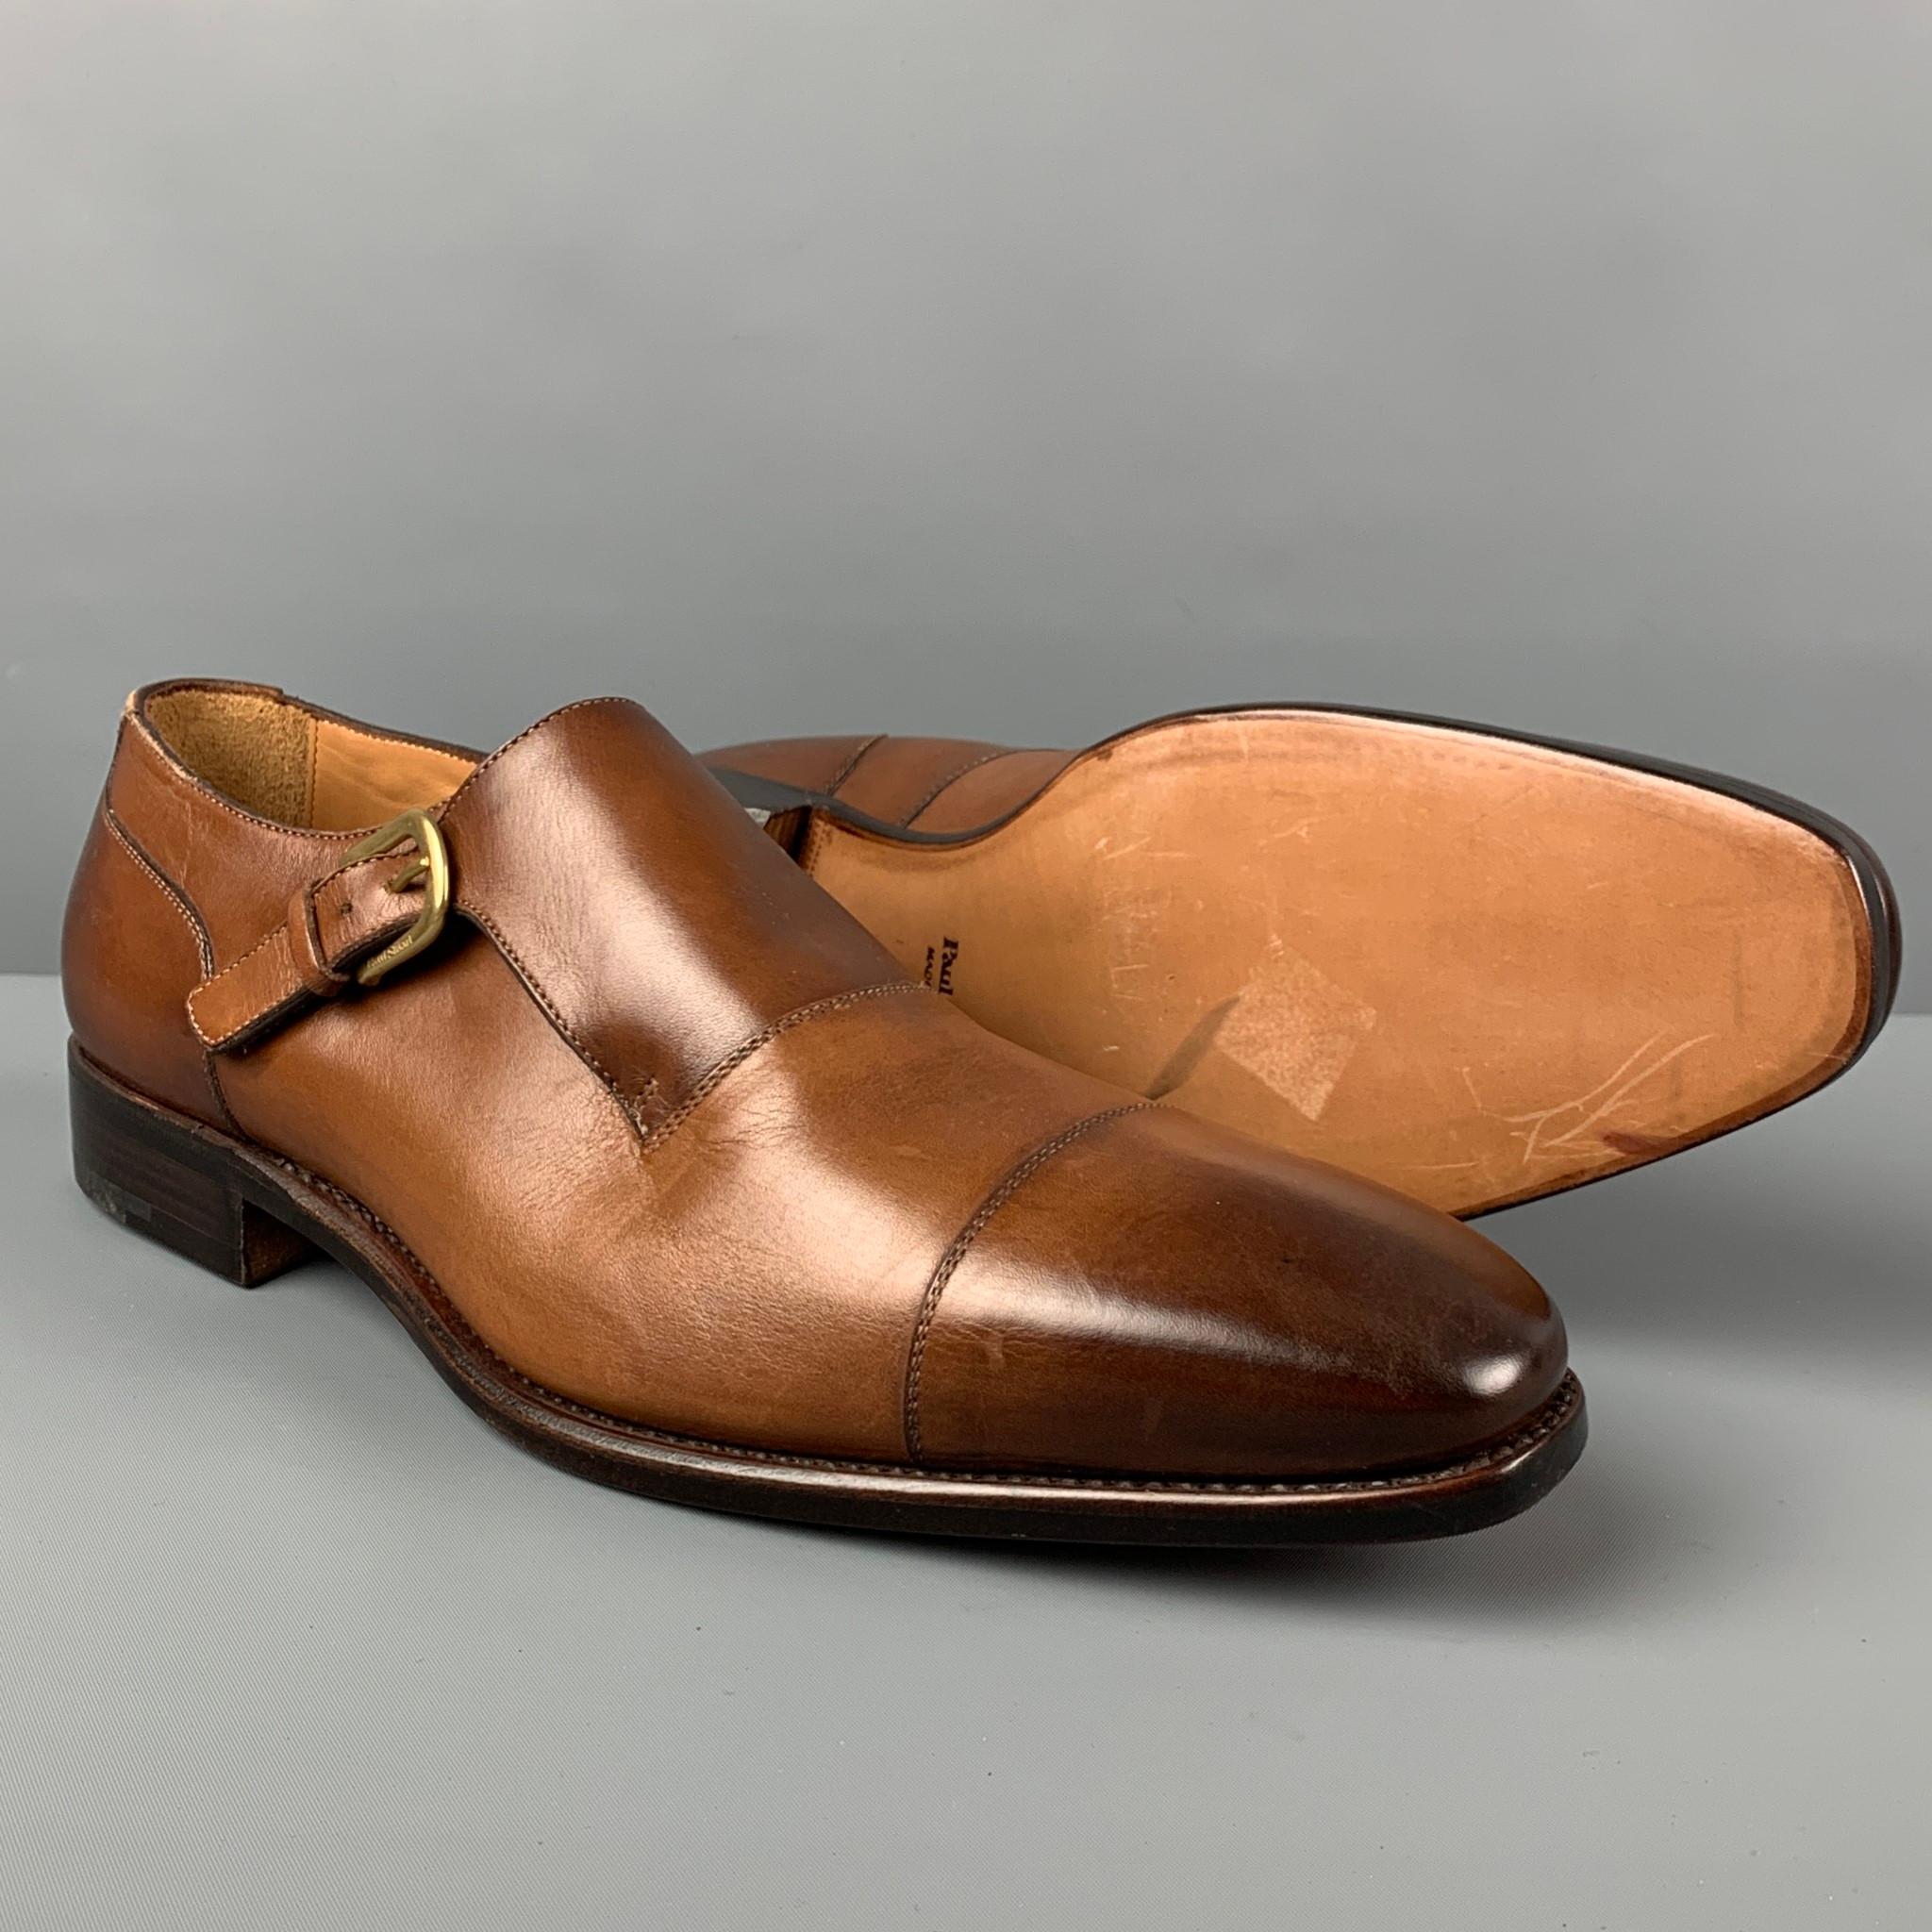 PAUL STUART shoes comes in a tan antique leather featuring a cap toe and a monk strap. Made in Italy. 

Very Good Pre-Owned Condition.
Marked: 10 U /11 US

Outsole: 12.75 in. x 4 in. 